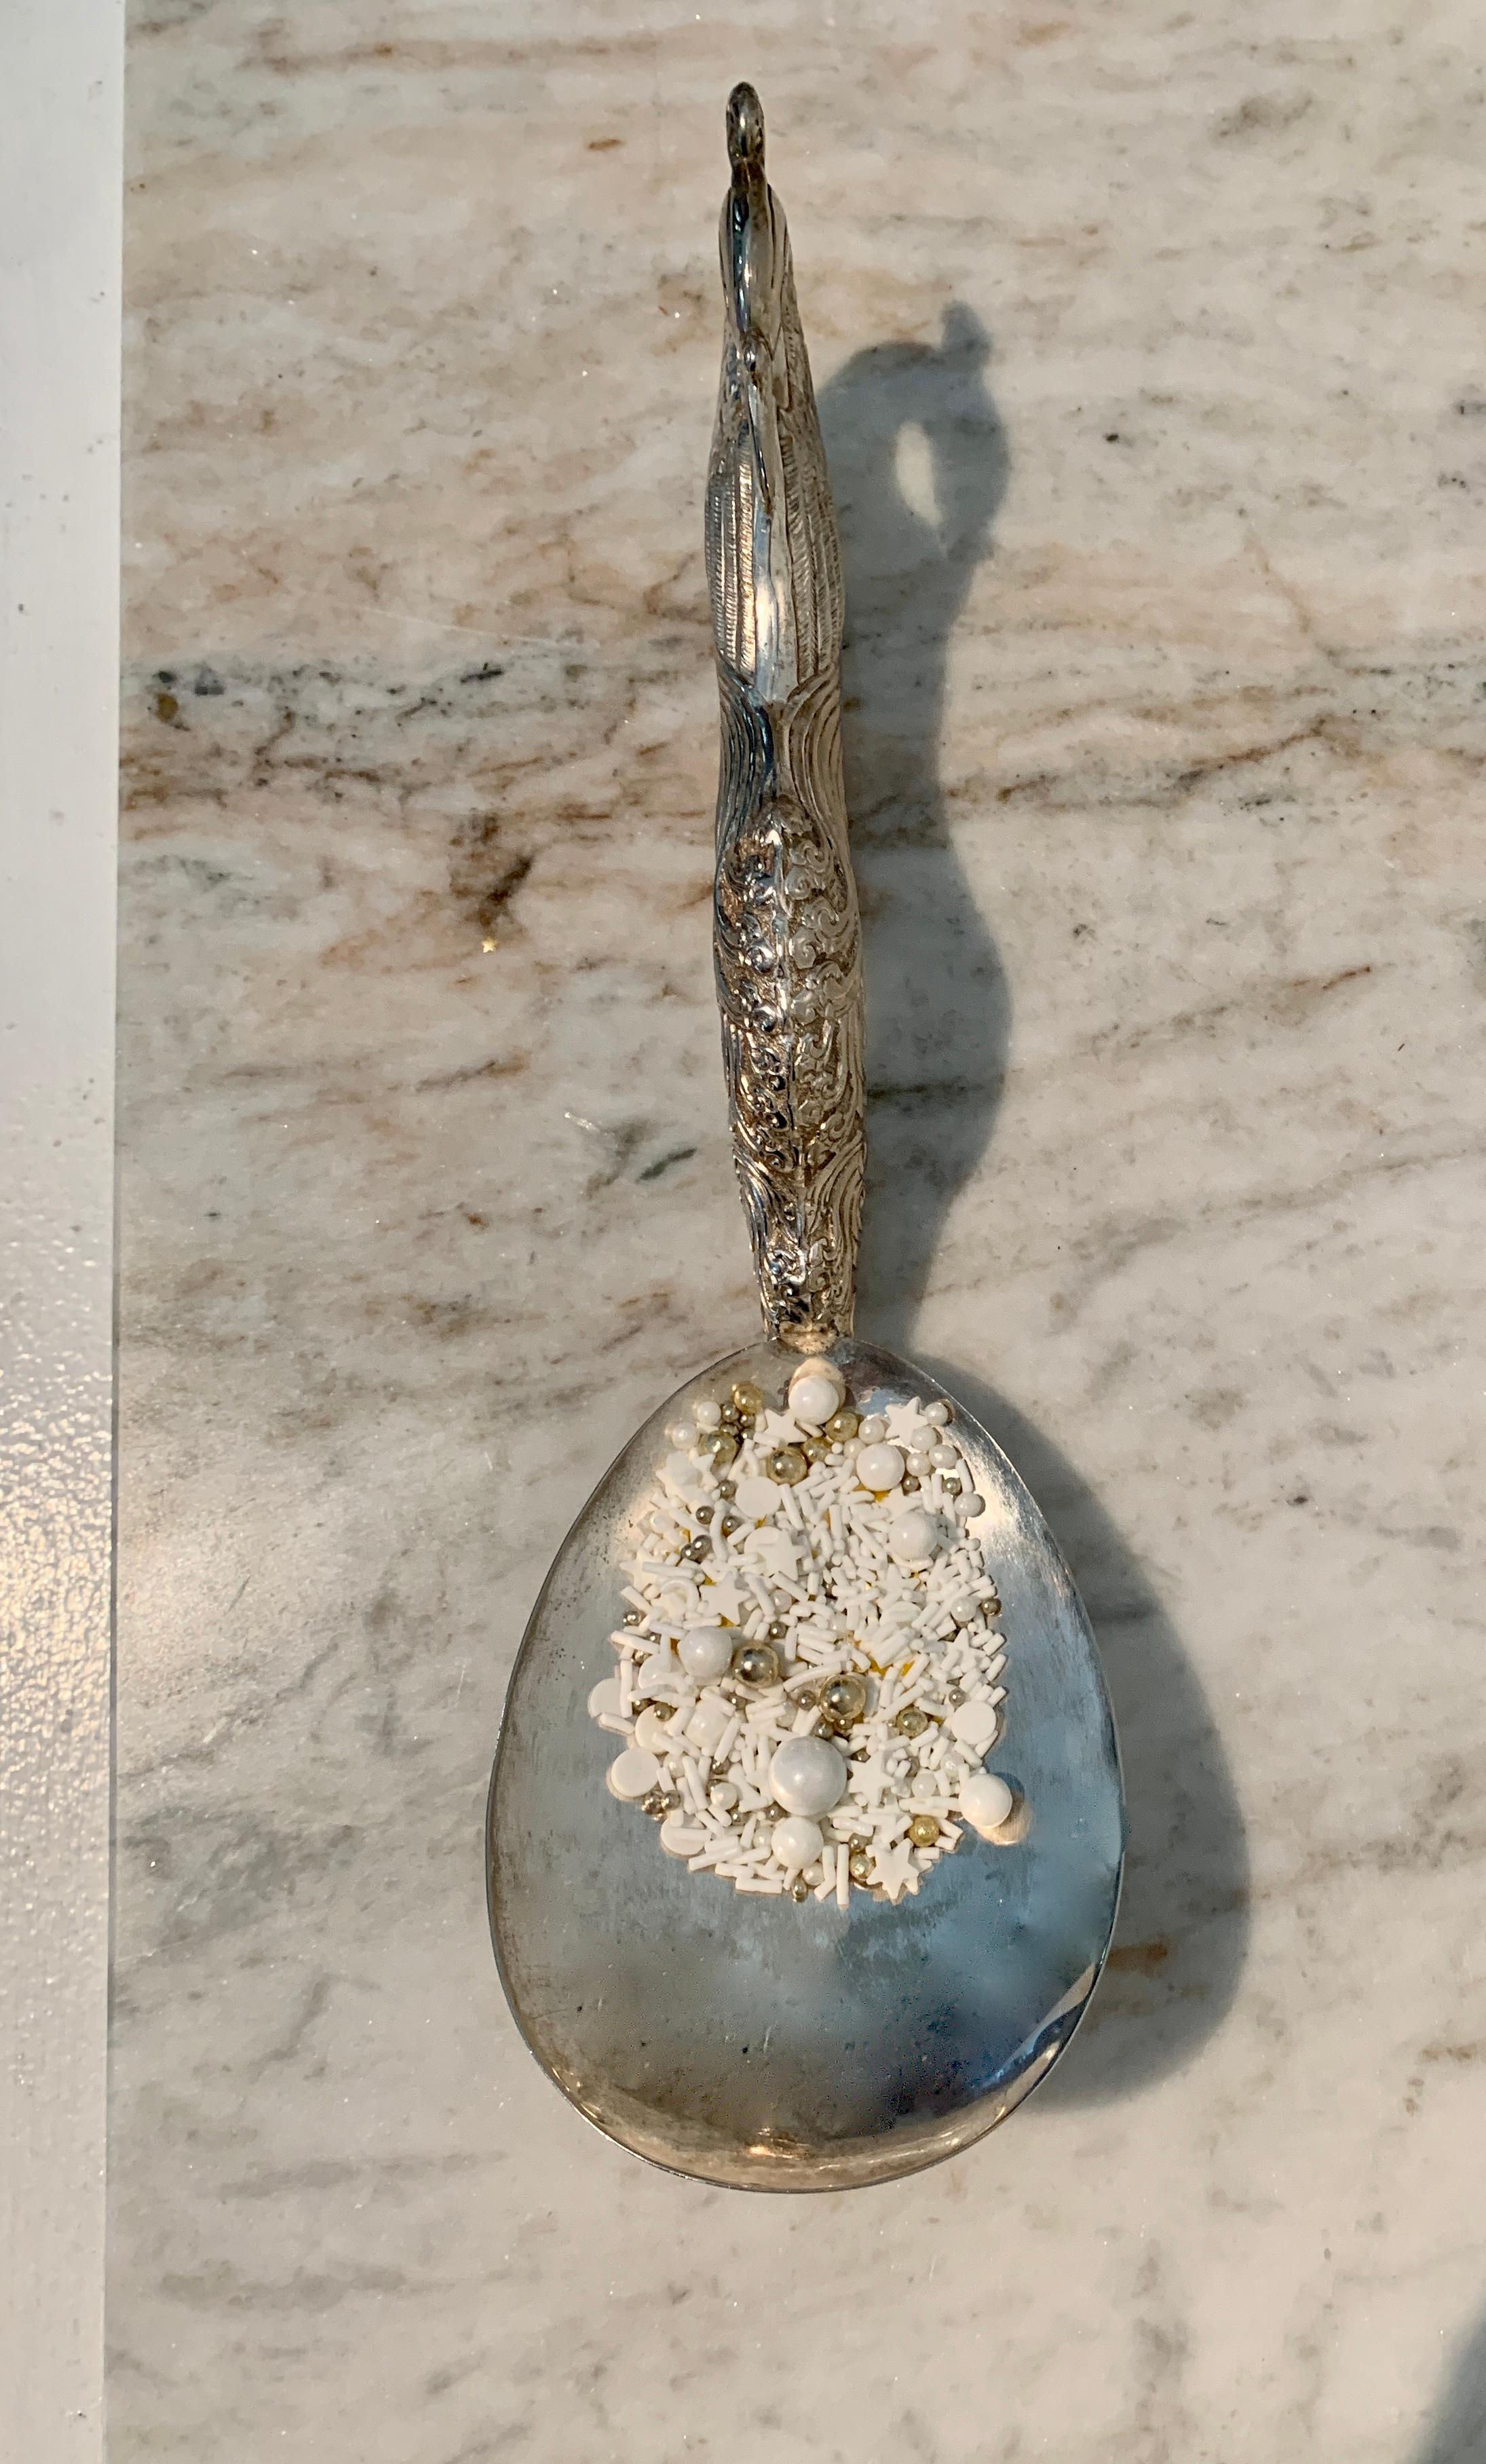 A most wonderful addition to any table - a serving spoon that will make your friends talk to each other. An intricately detailed Repoussé peacock handled spoon. One of the most impressive utensils I have seen.  Not certain if this is plate or